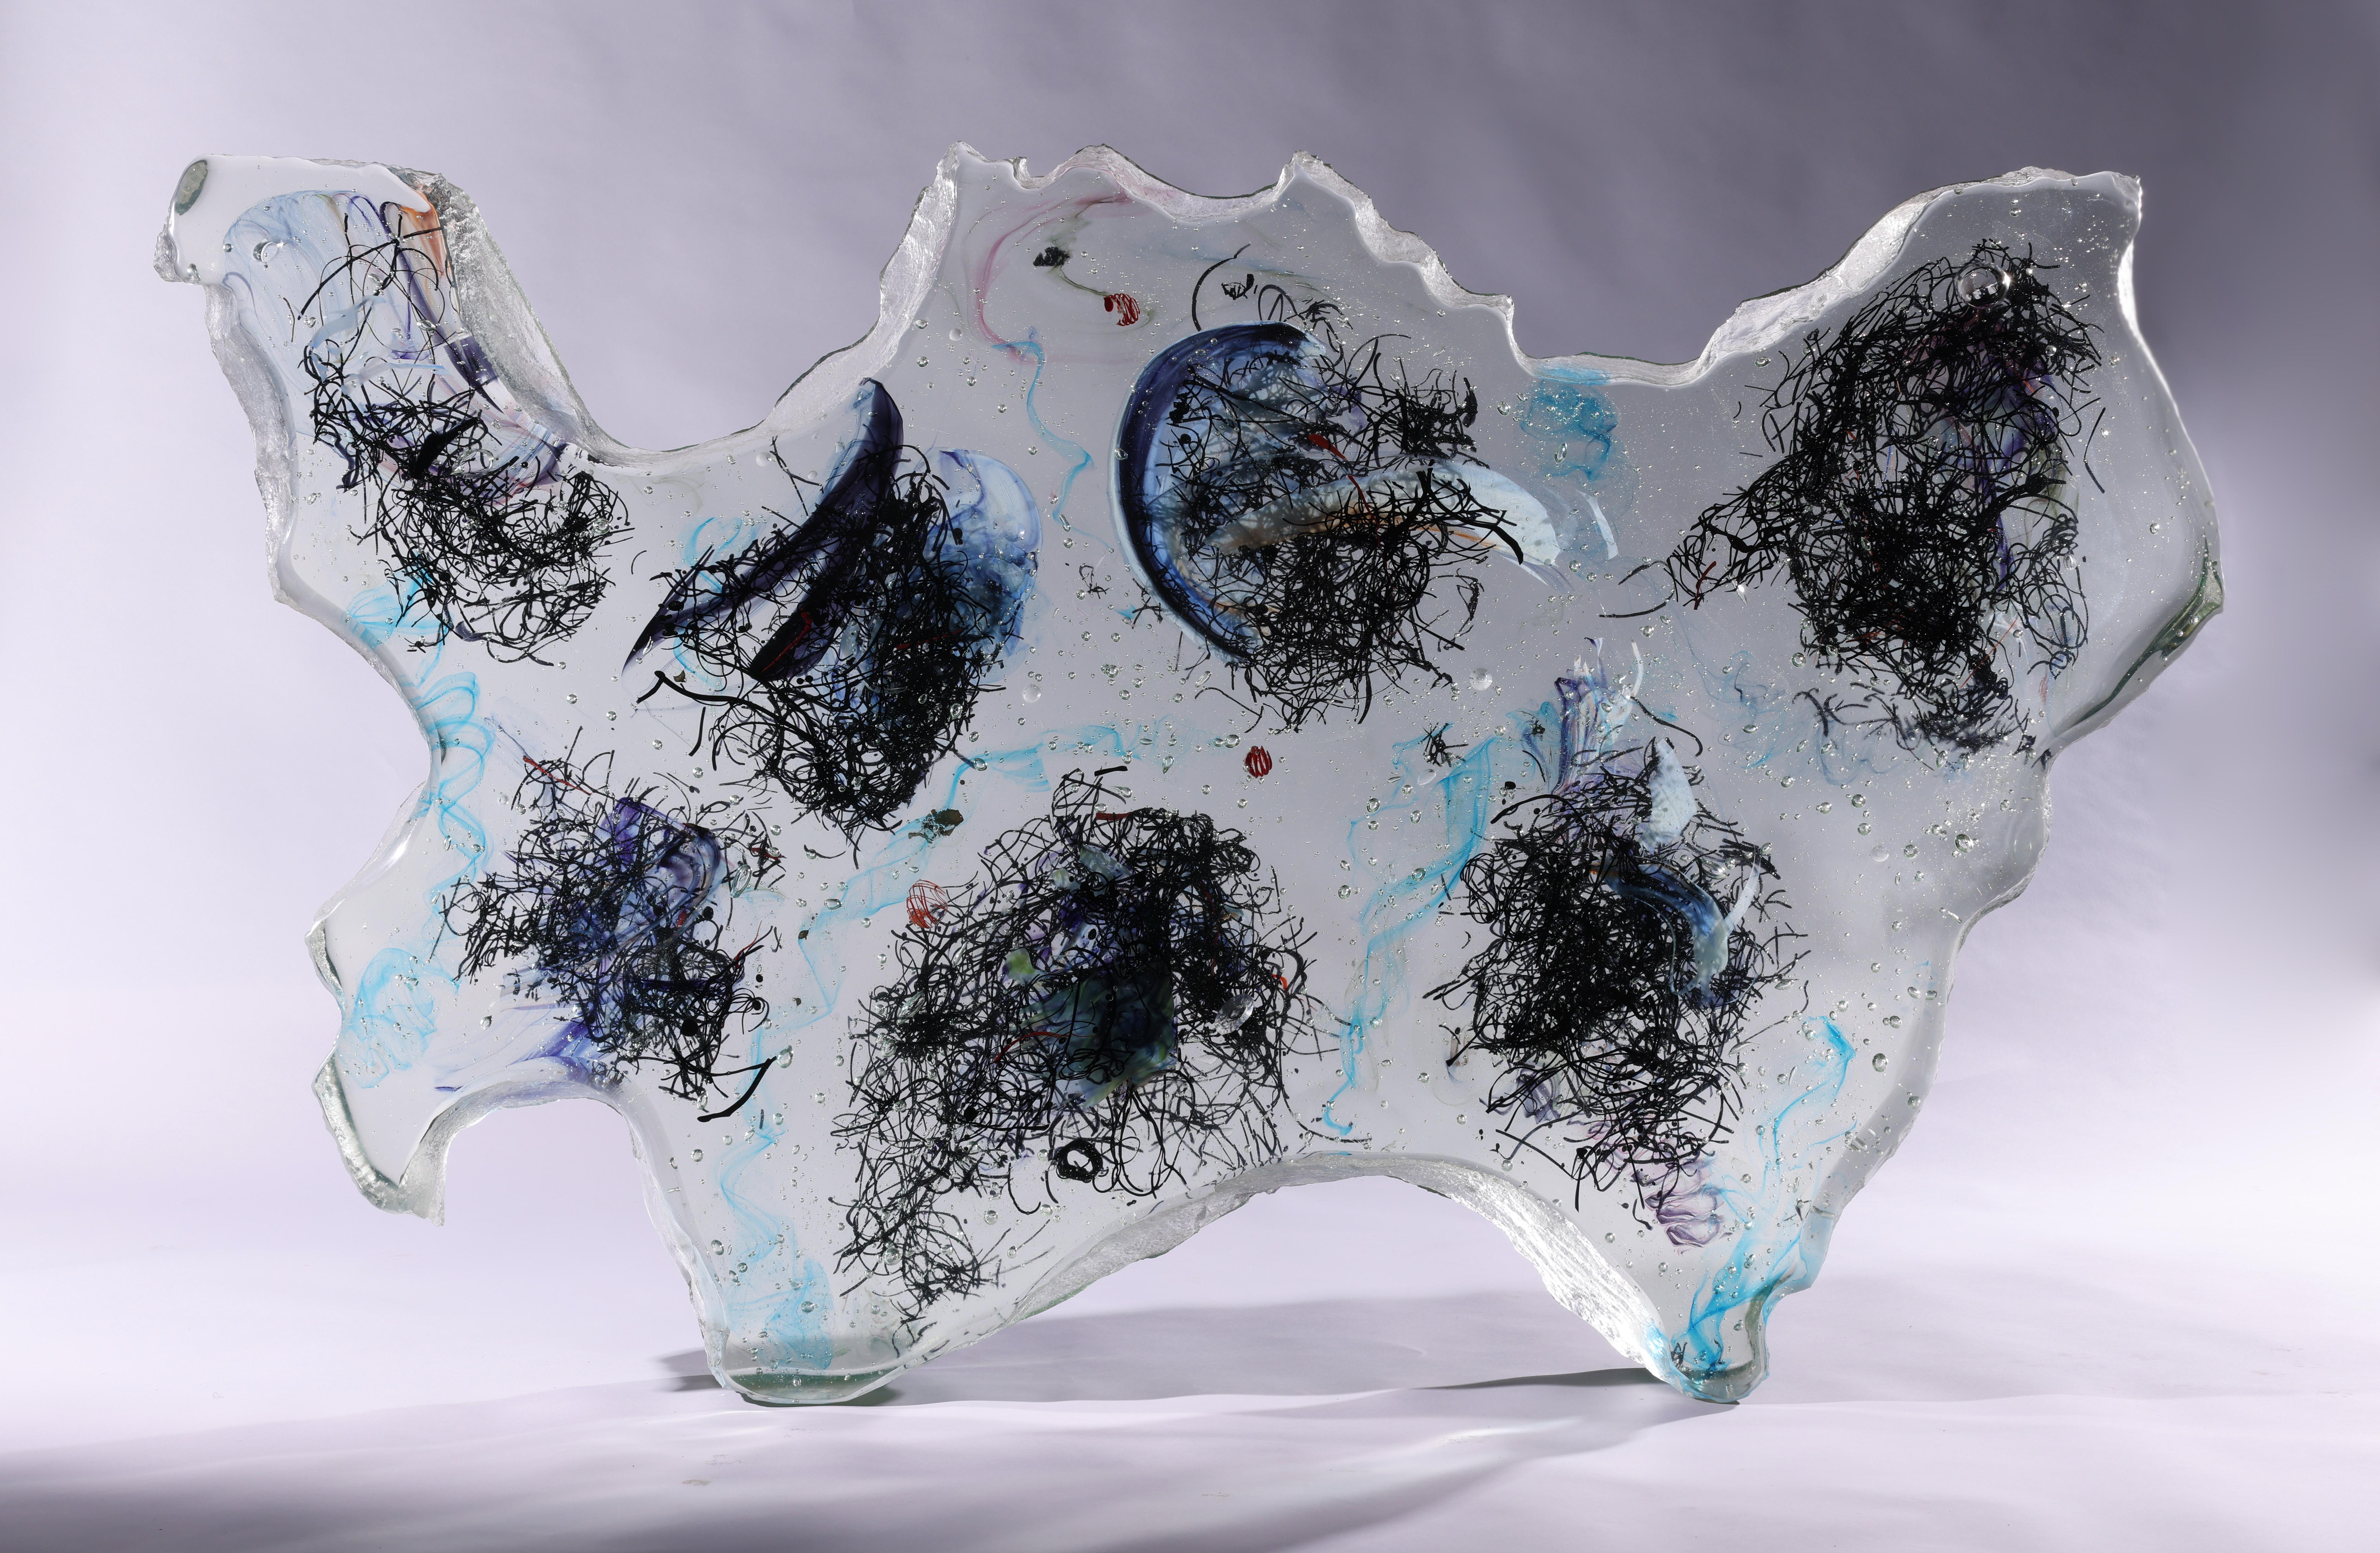 Abstract Cast Glass Sculpture, 'Lekhoo Beshalom', 1991 by David Ruth